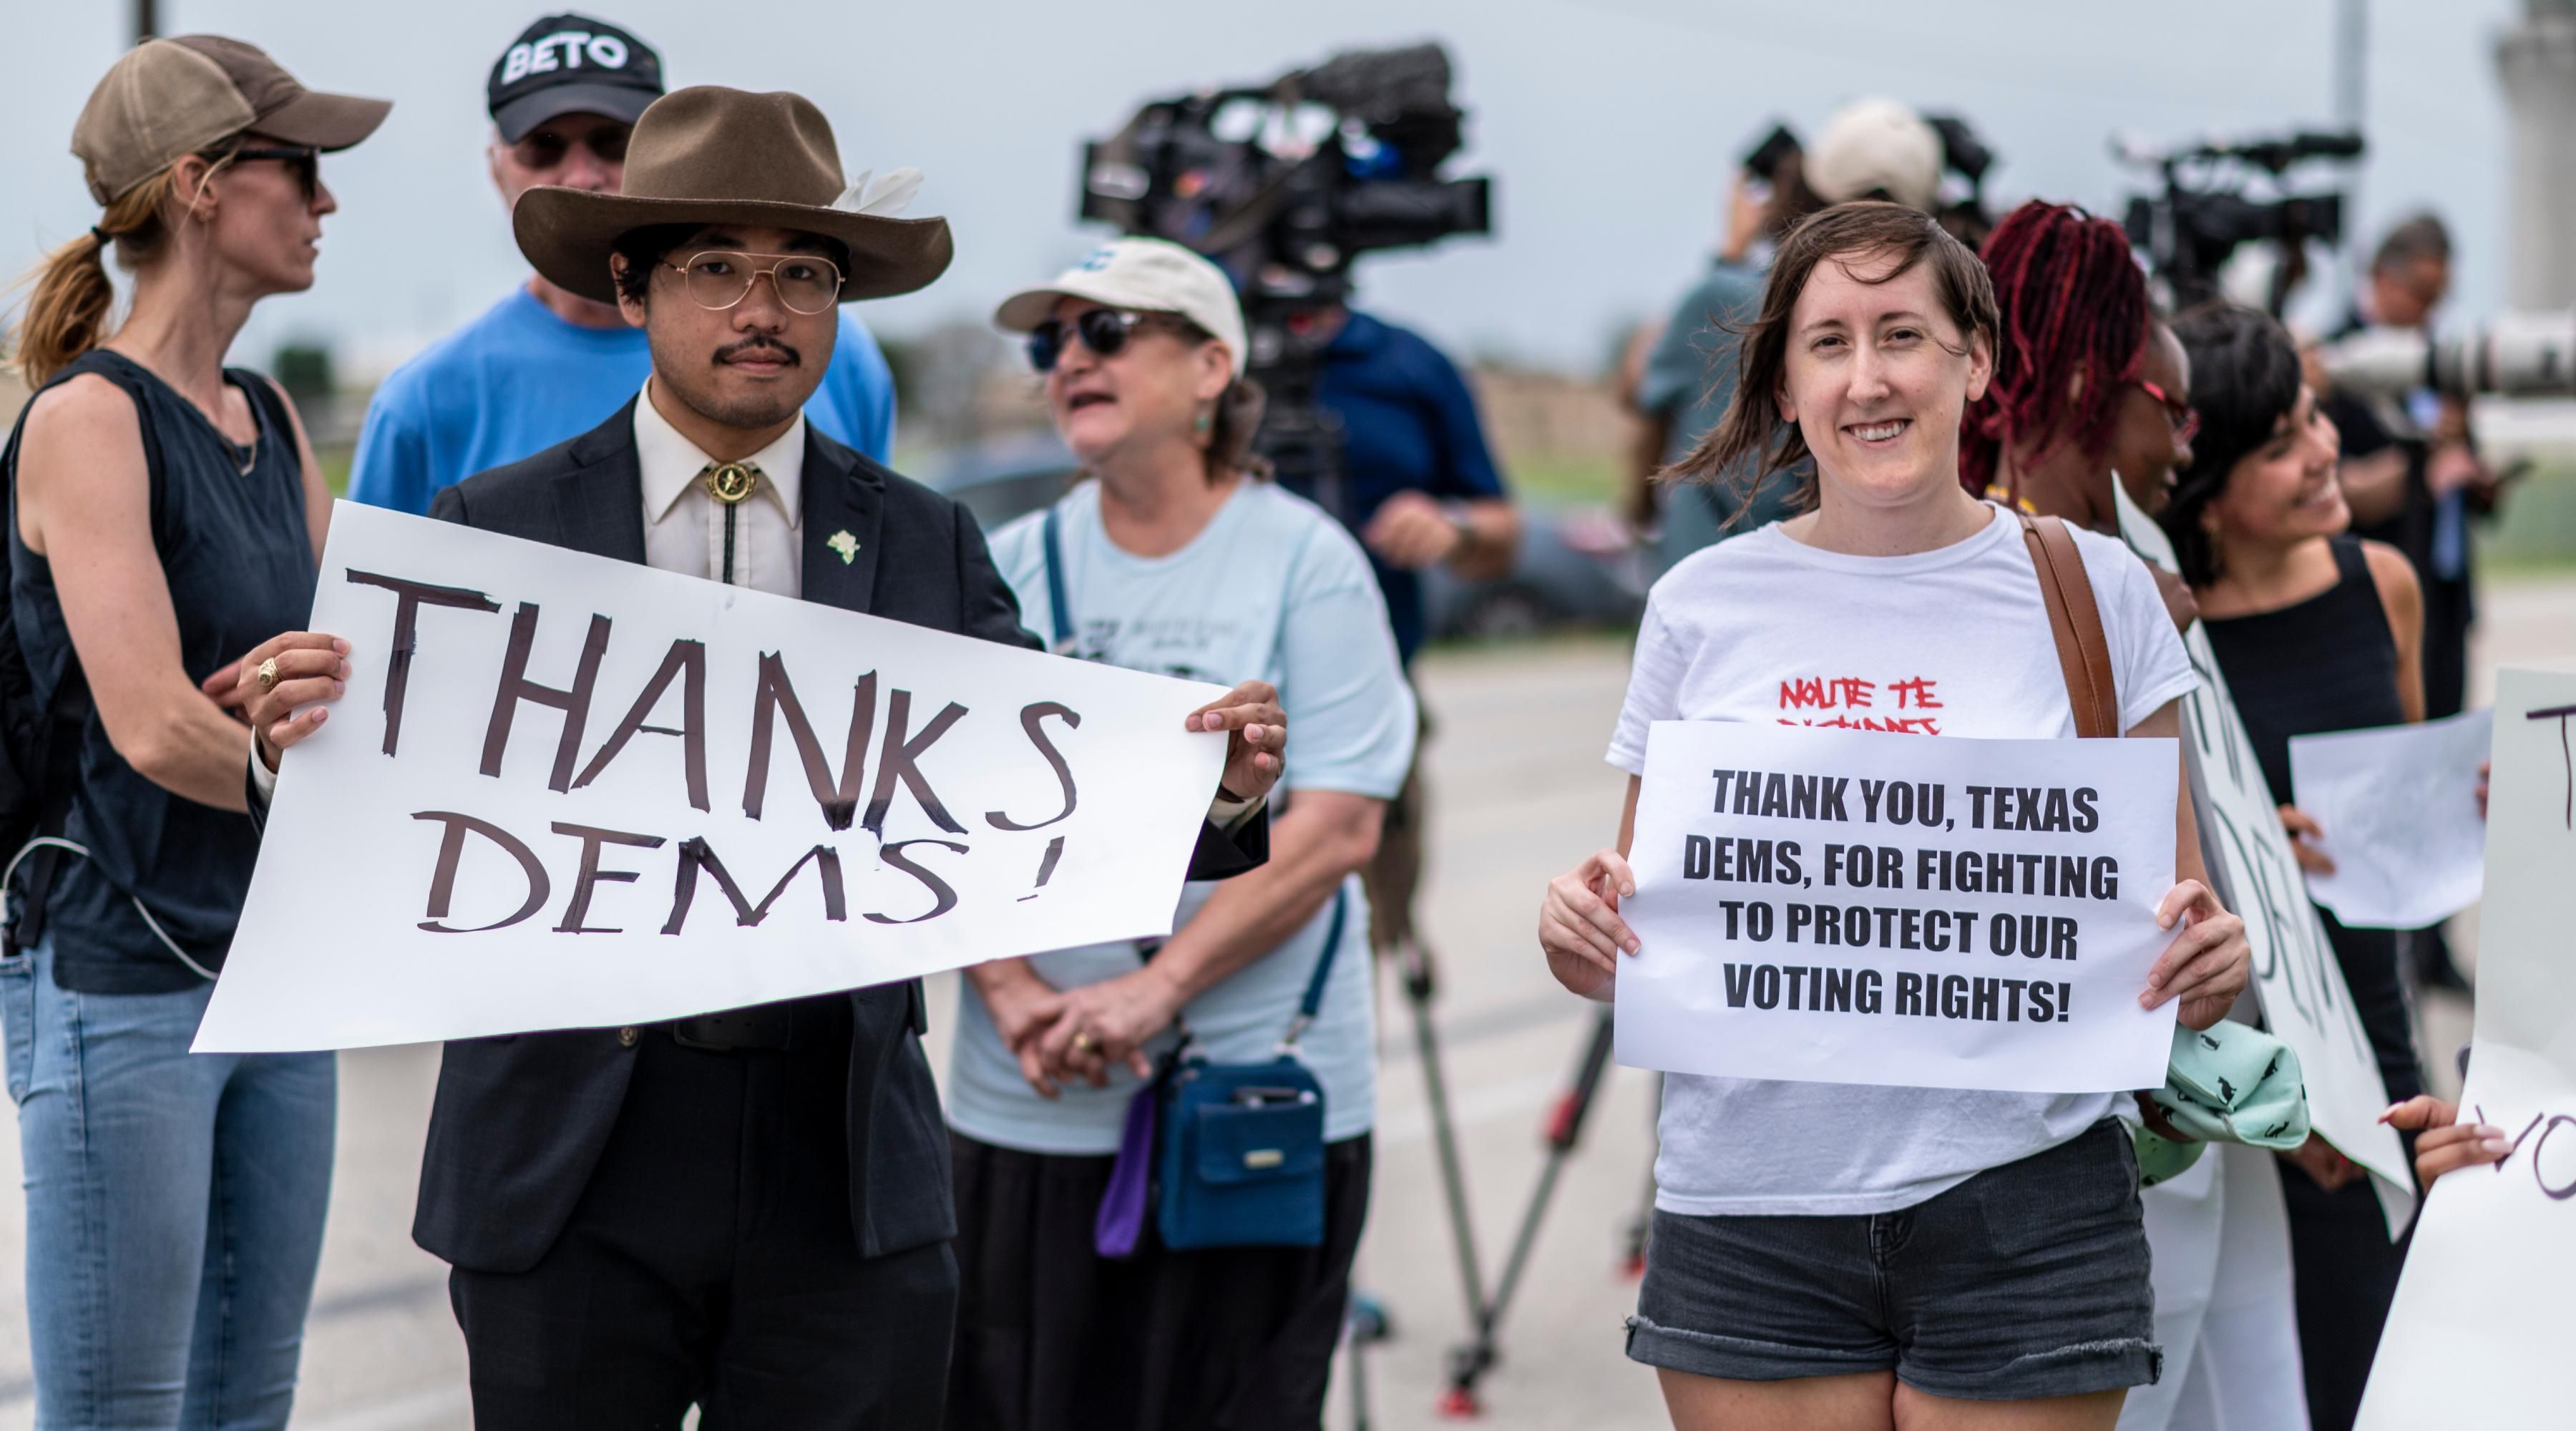 Supporters for Texas Democrats stand outside the Austin Bergstrom International Airport on July 12, 2021 in Austin, Texas. Texas Democrats fled the state to prevent a quorum after protesting SB7, a voting protection bill that Democrats have criticized as being too restrictive.